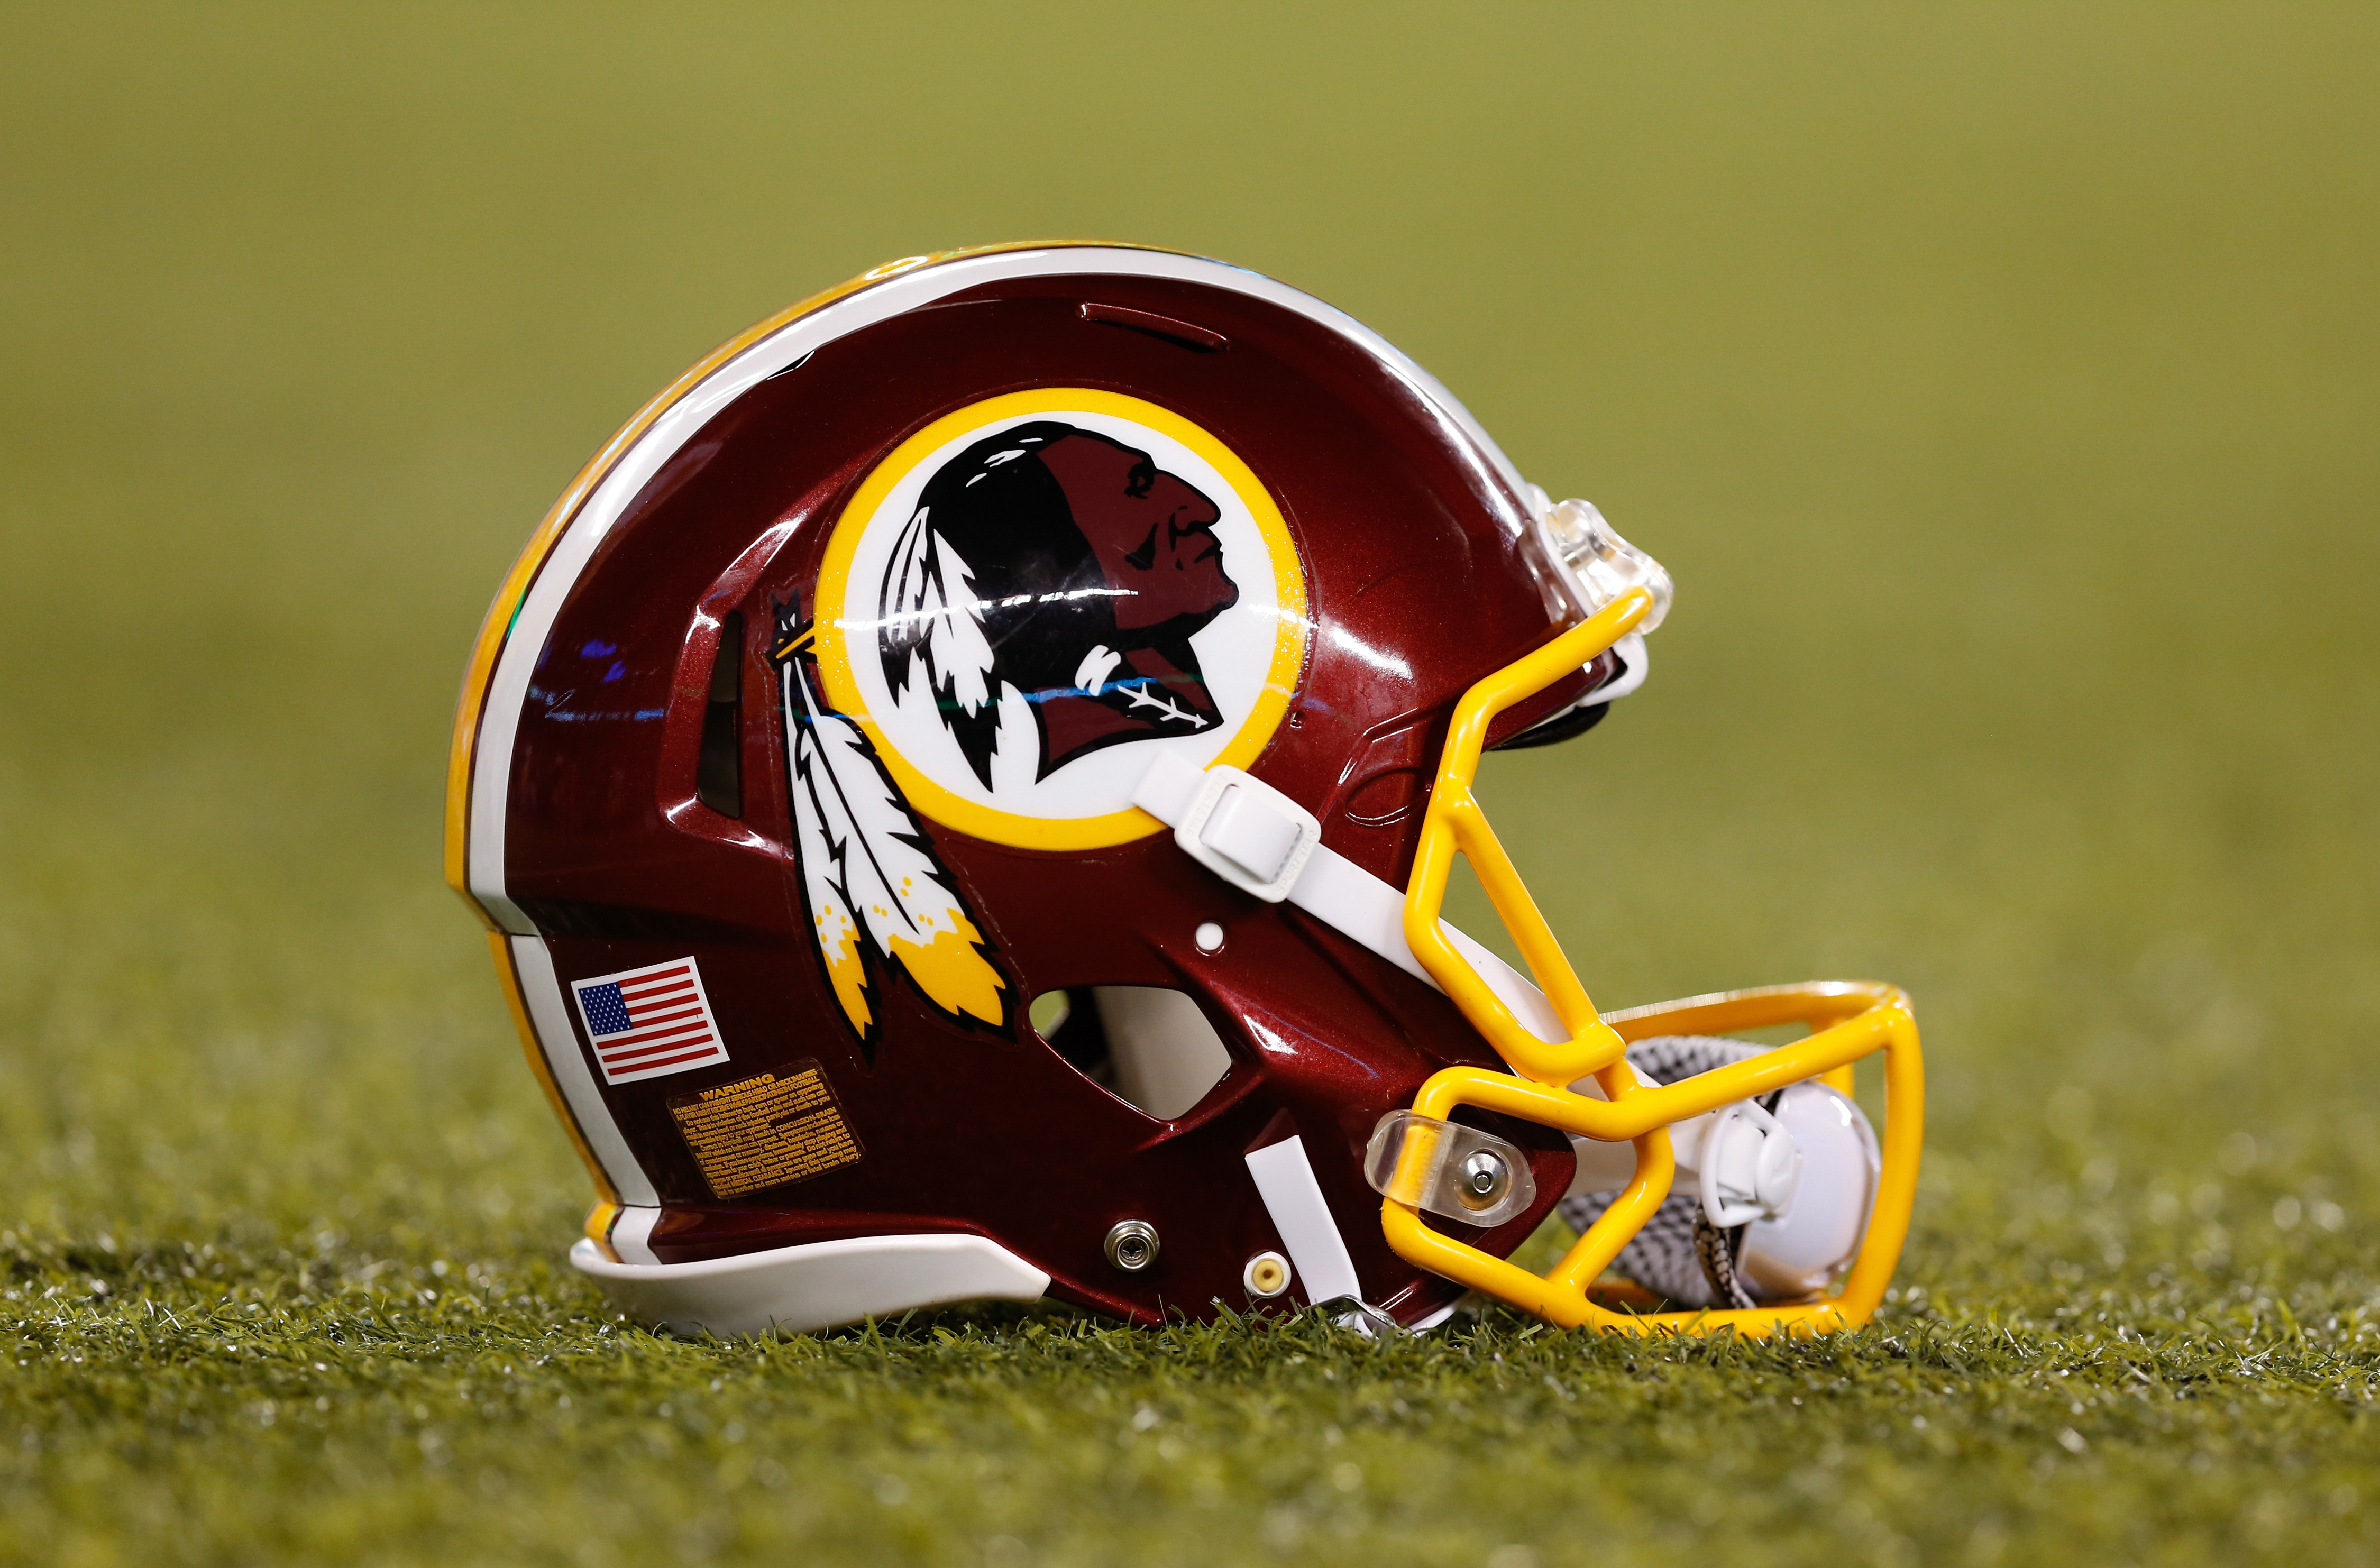 A detail view of a Washington Redskins helmet. California Governor Jerry Brown signed a bill into law Sunday banning public schools from using the term "Redskins" as a team name or mascot. (Aaron M. Sprecher—AP)